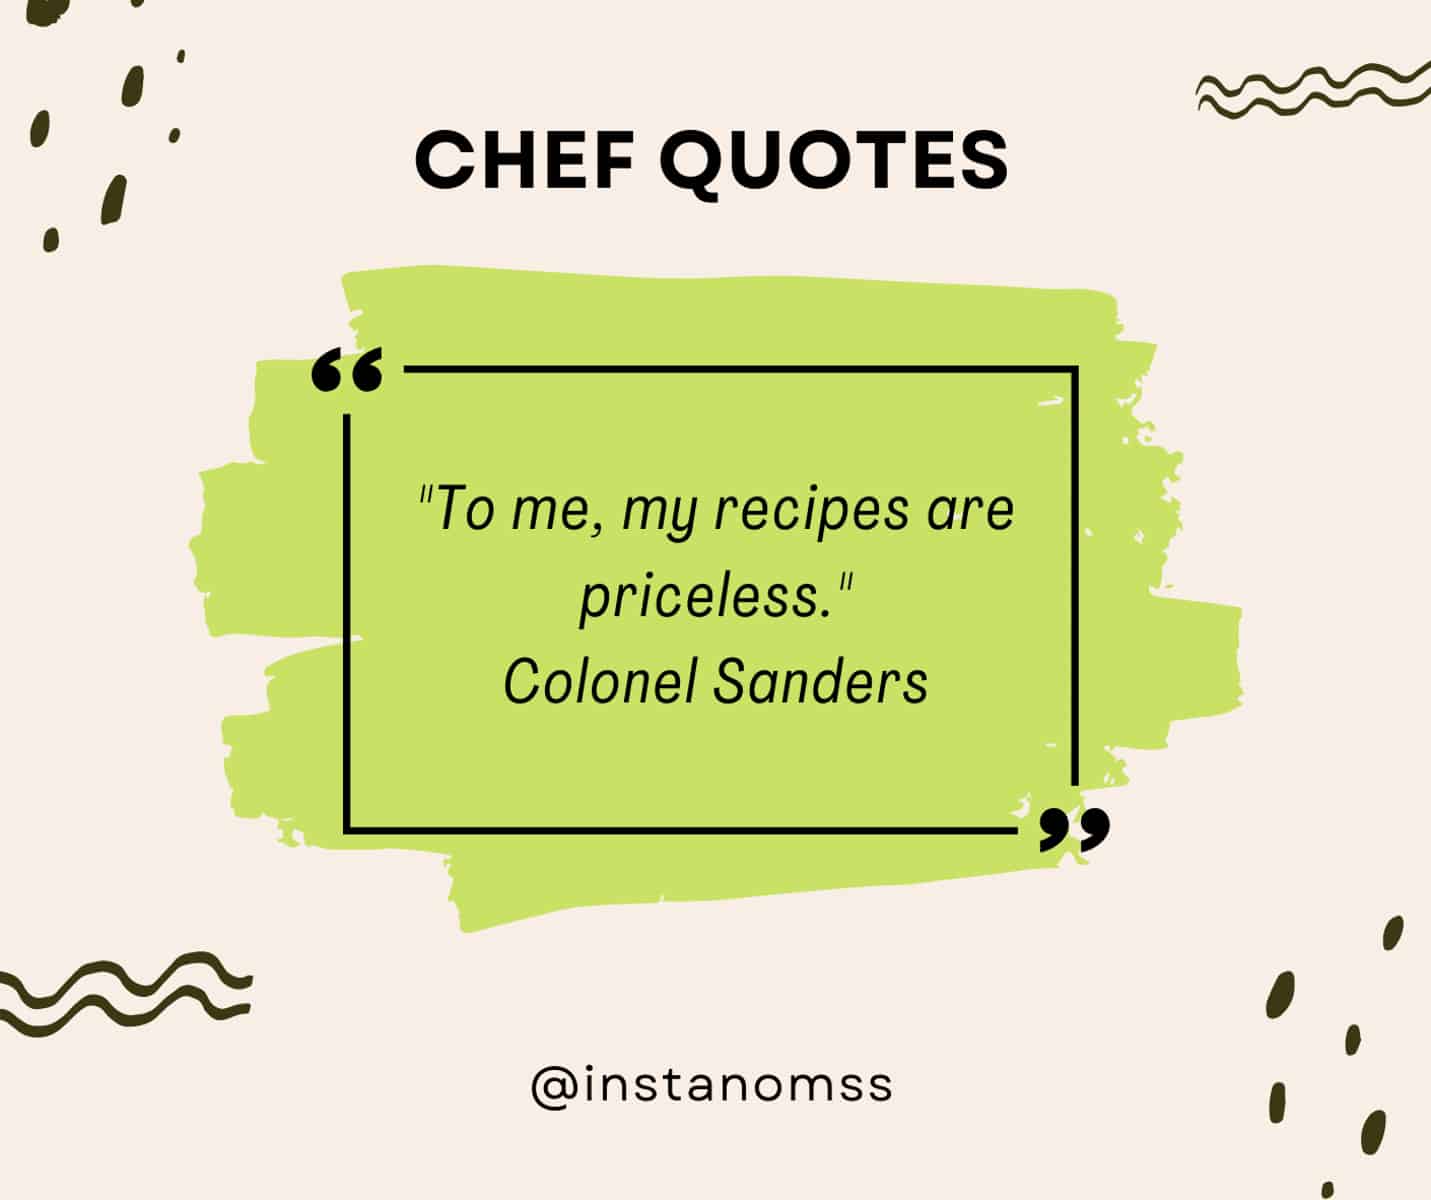 "To me, my recipes are priceless." Colonel Sanders